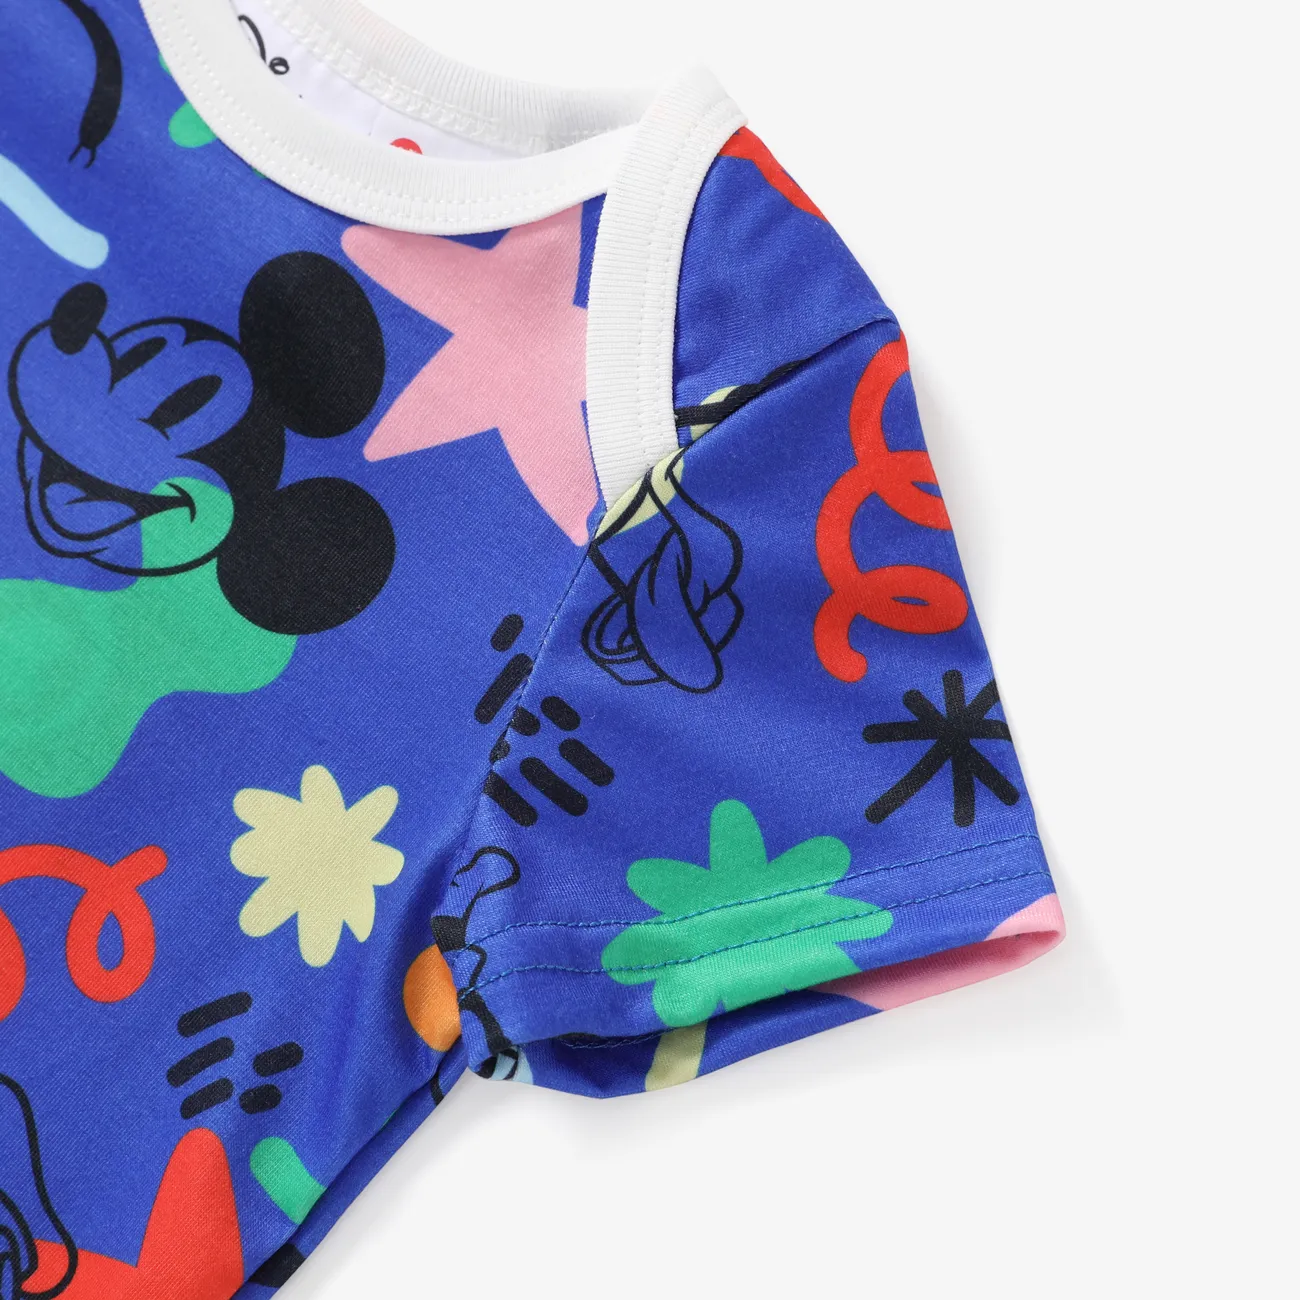 Disney Mickey and Friends 1pc Baby Girls/Boys Naia™ Character Doodle Print Romper Blue big image 1